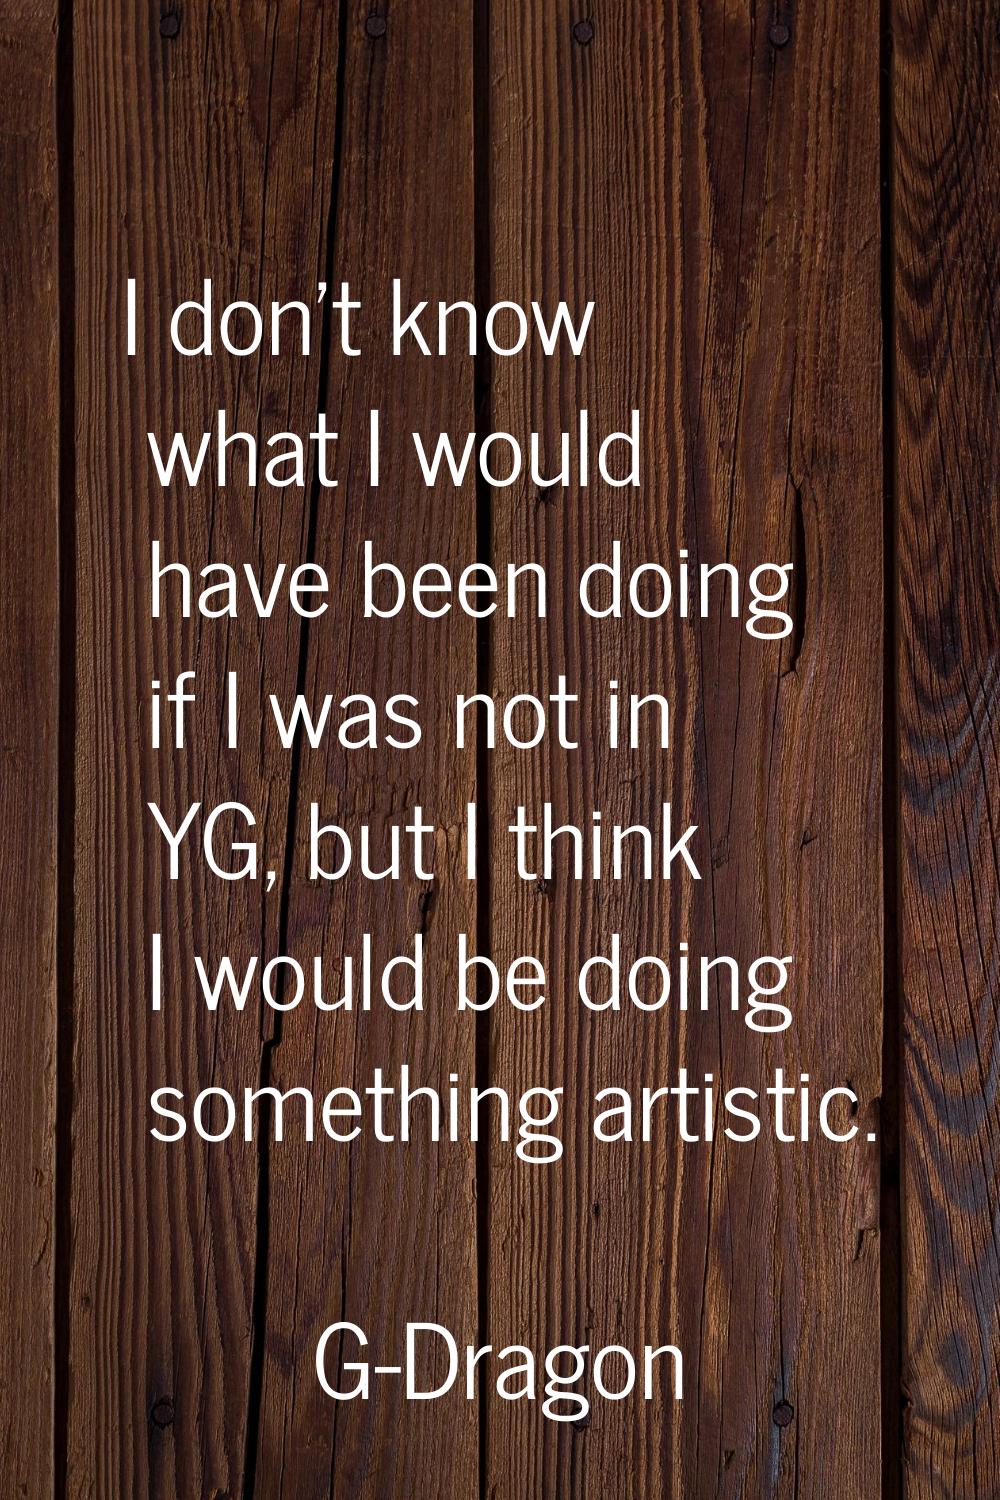 I don't know what I would have been doing if I was not in YG, but I think I would be doing somethin